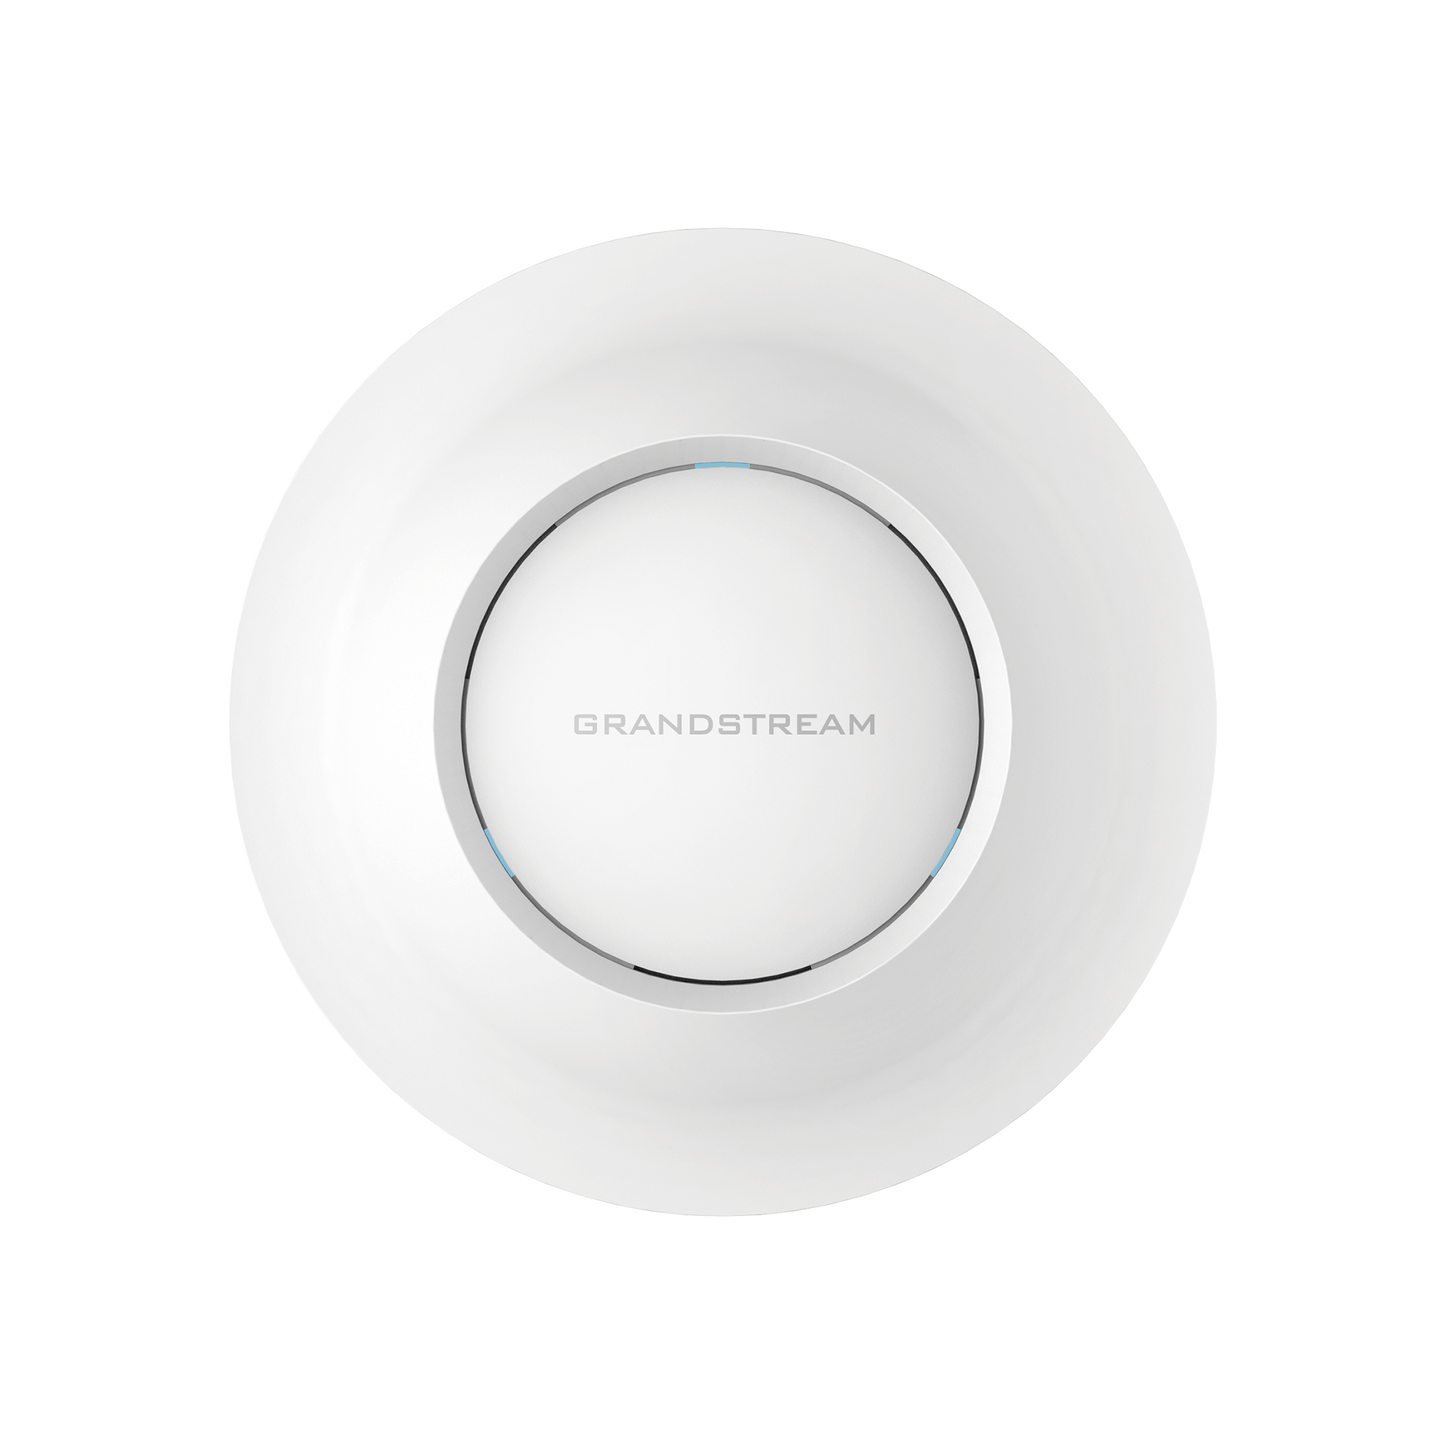 High-performance 802.11ac Wave-2 Wi-Fi Access Point